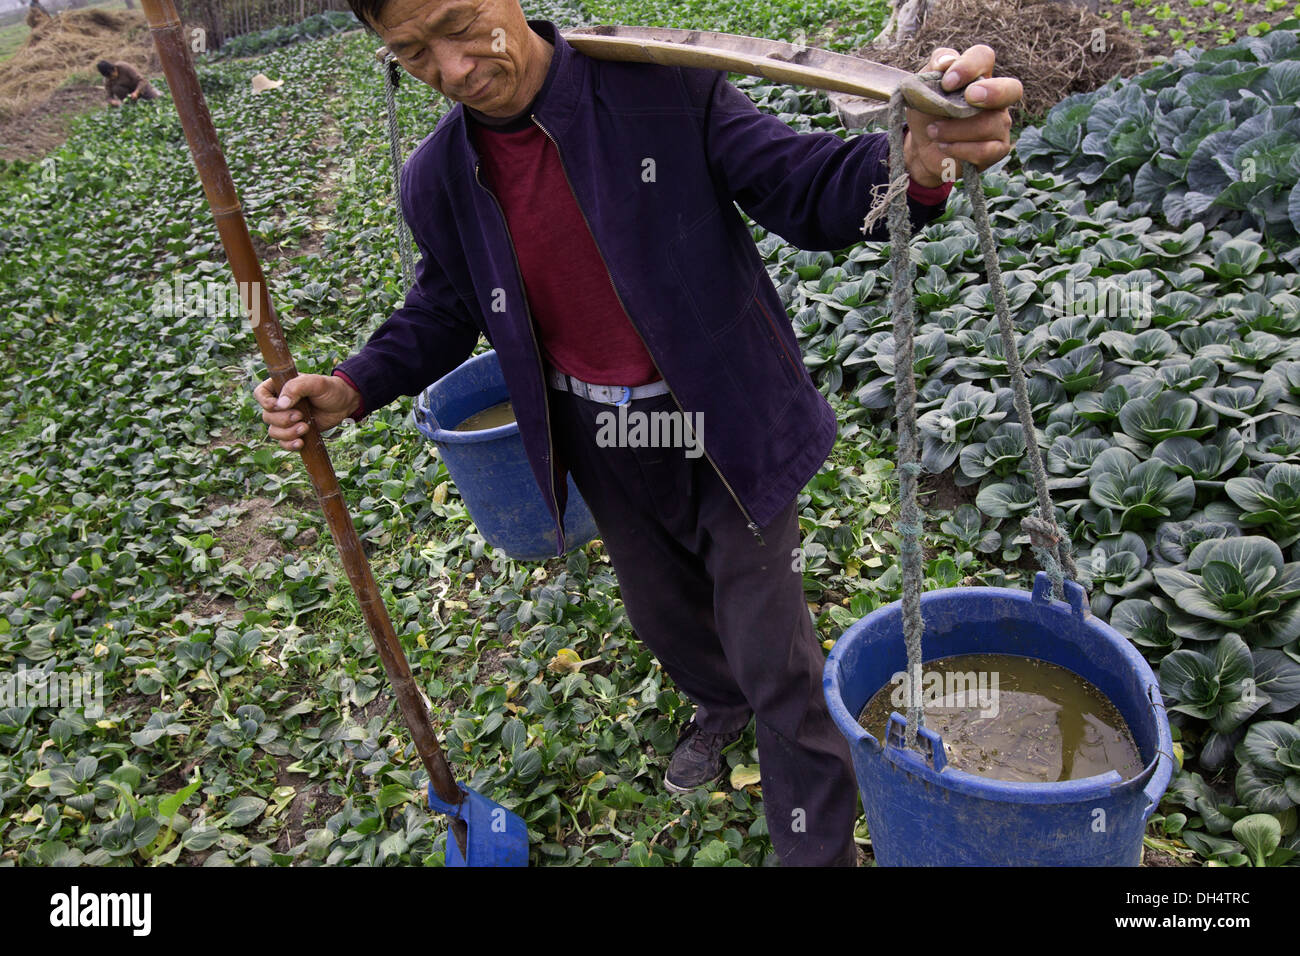 Farmer grows vegetables (mostly cabbage)using human waste for fertilizer in Changshu, China. Stock Photo